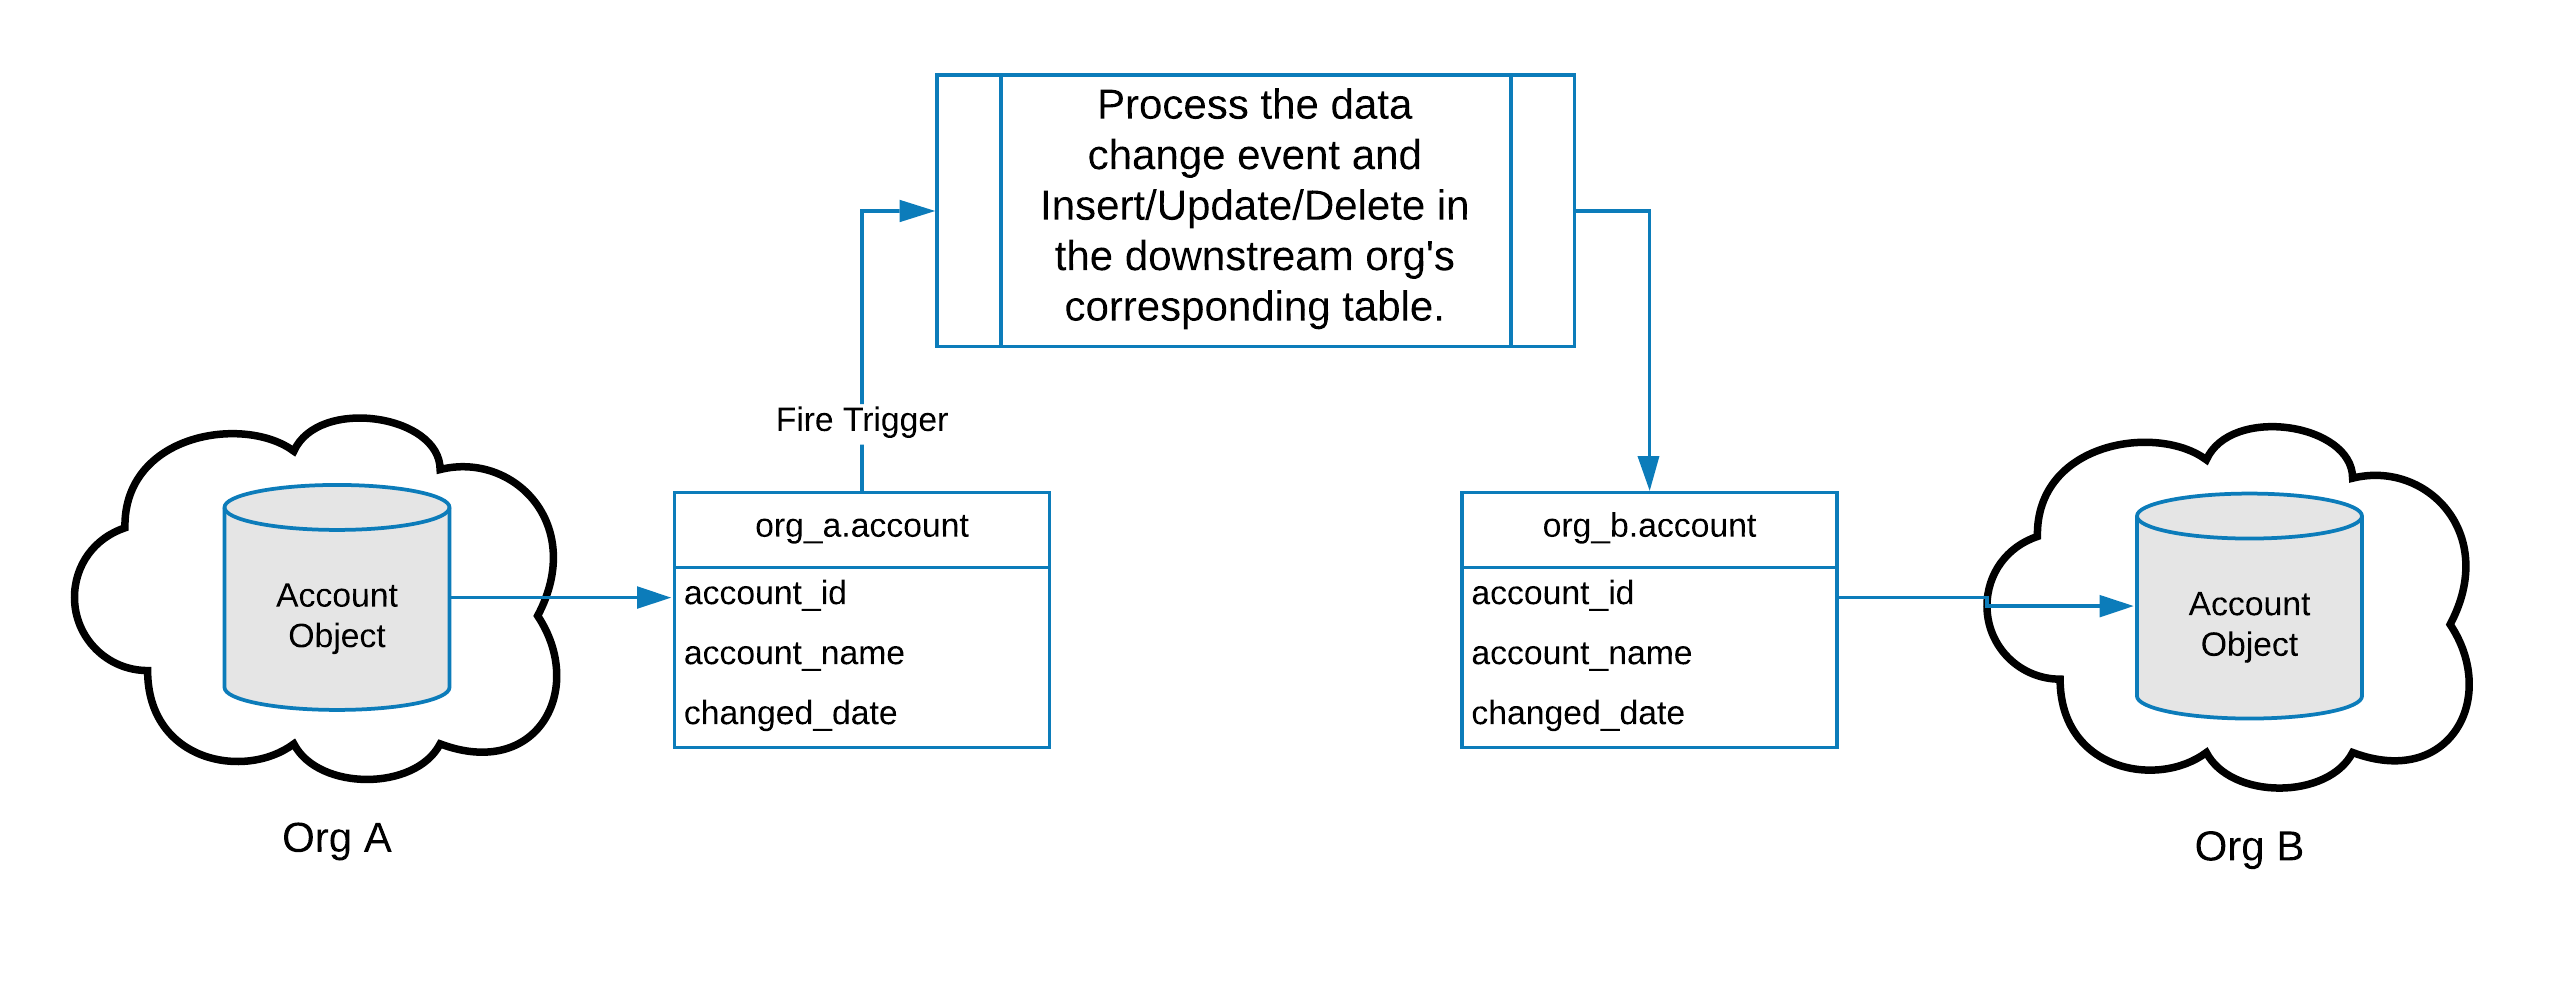 A PostgreSQL trigger can be used to migrate a change to a downstream table